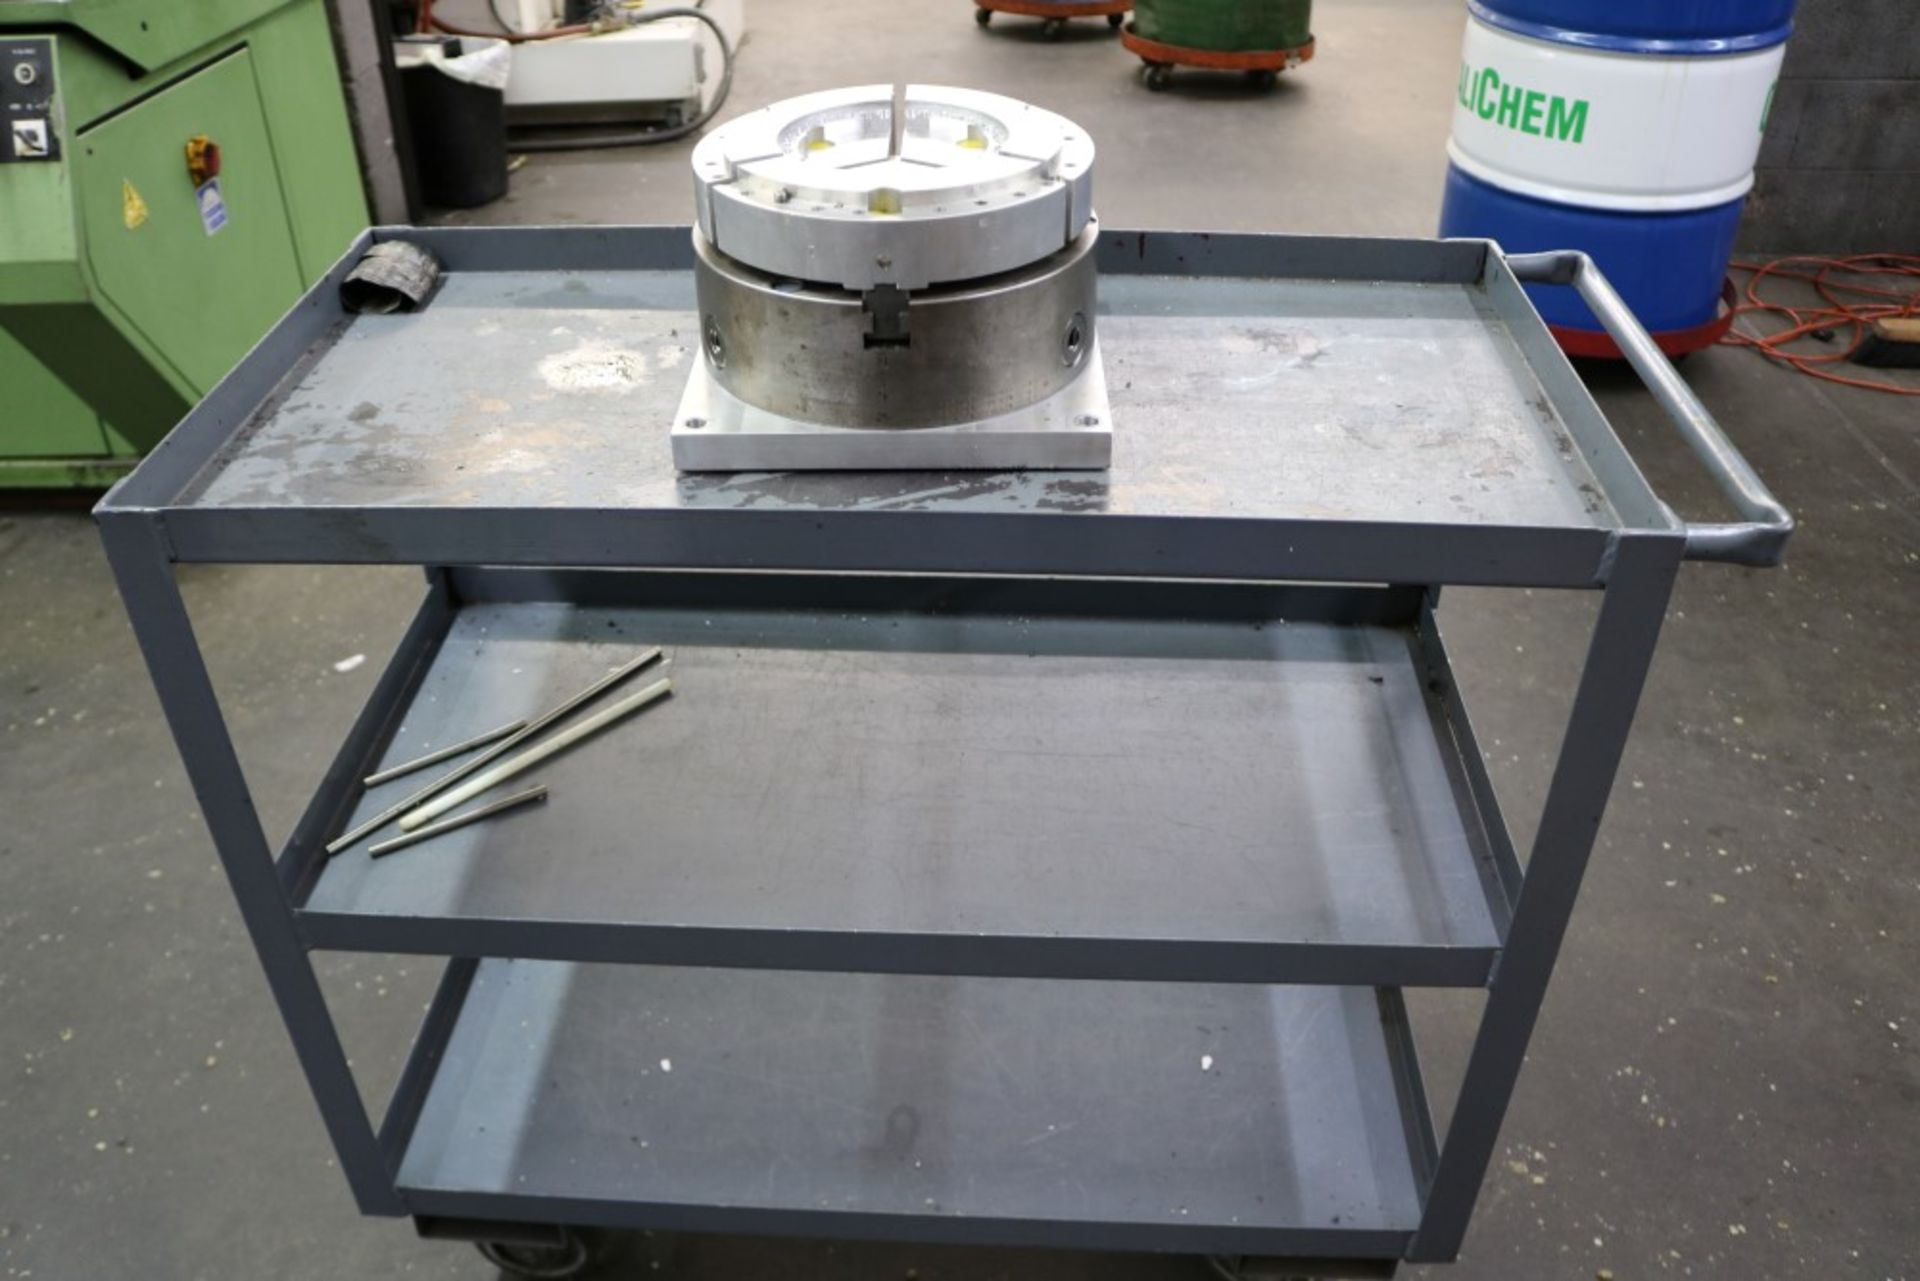 3 Tier Heavy Duty Rolling Cart with 10" 3 Jaw Chuck Fixture - Image 5 of 6